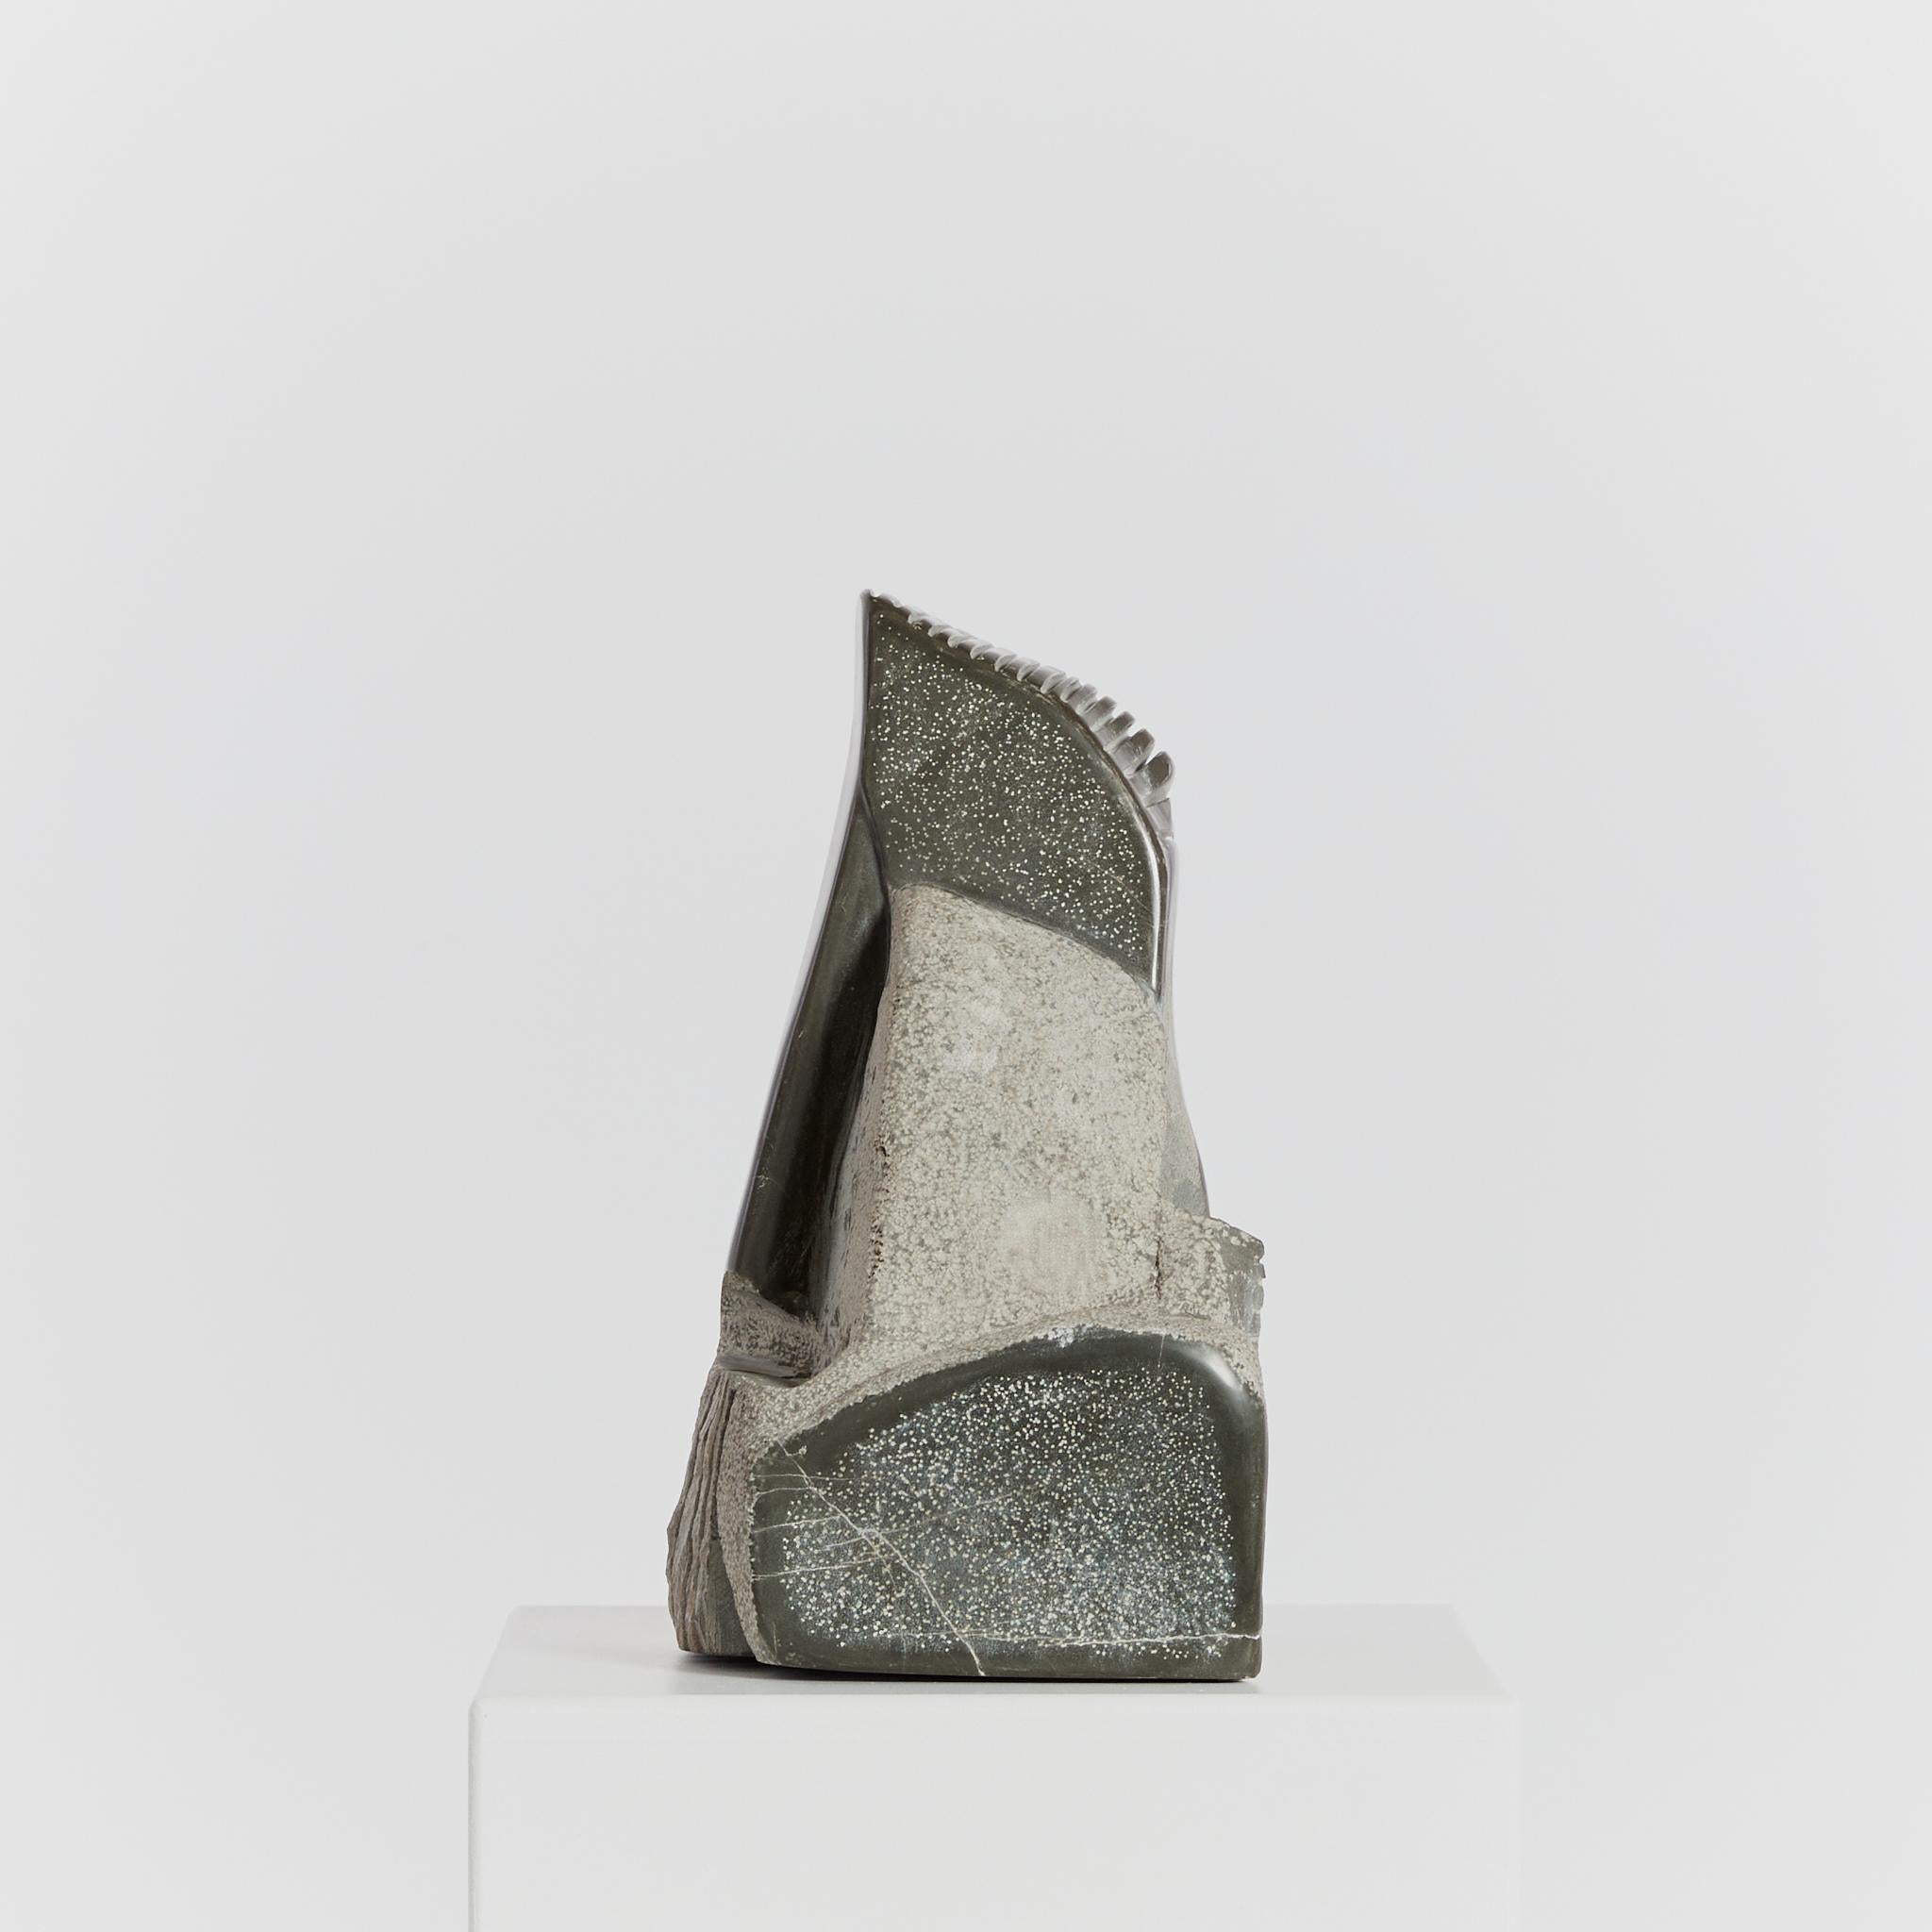 Limestone ‘Monticule’ Abstract Stone Sculpture by Michel Hoppe, Signed For Sale